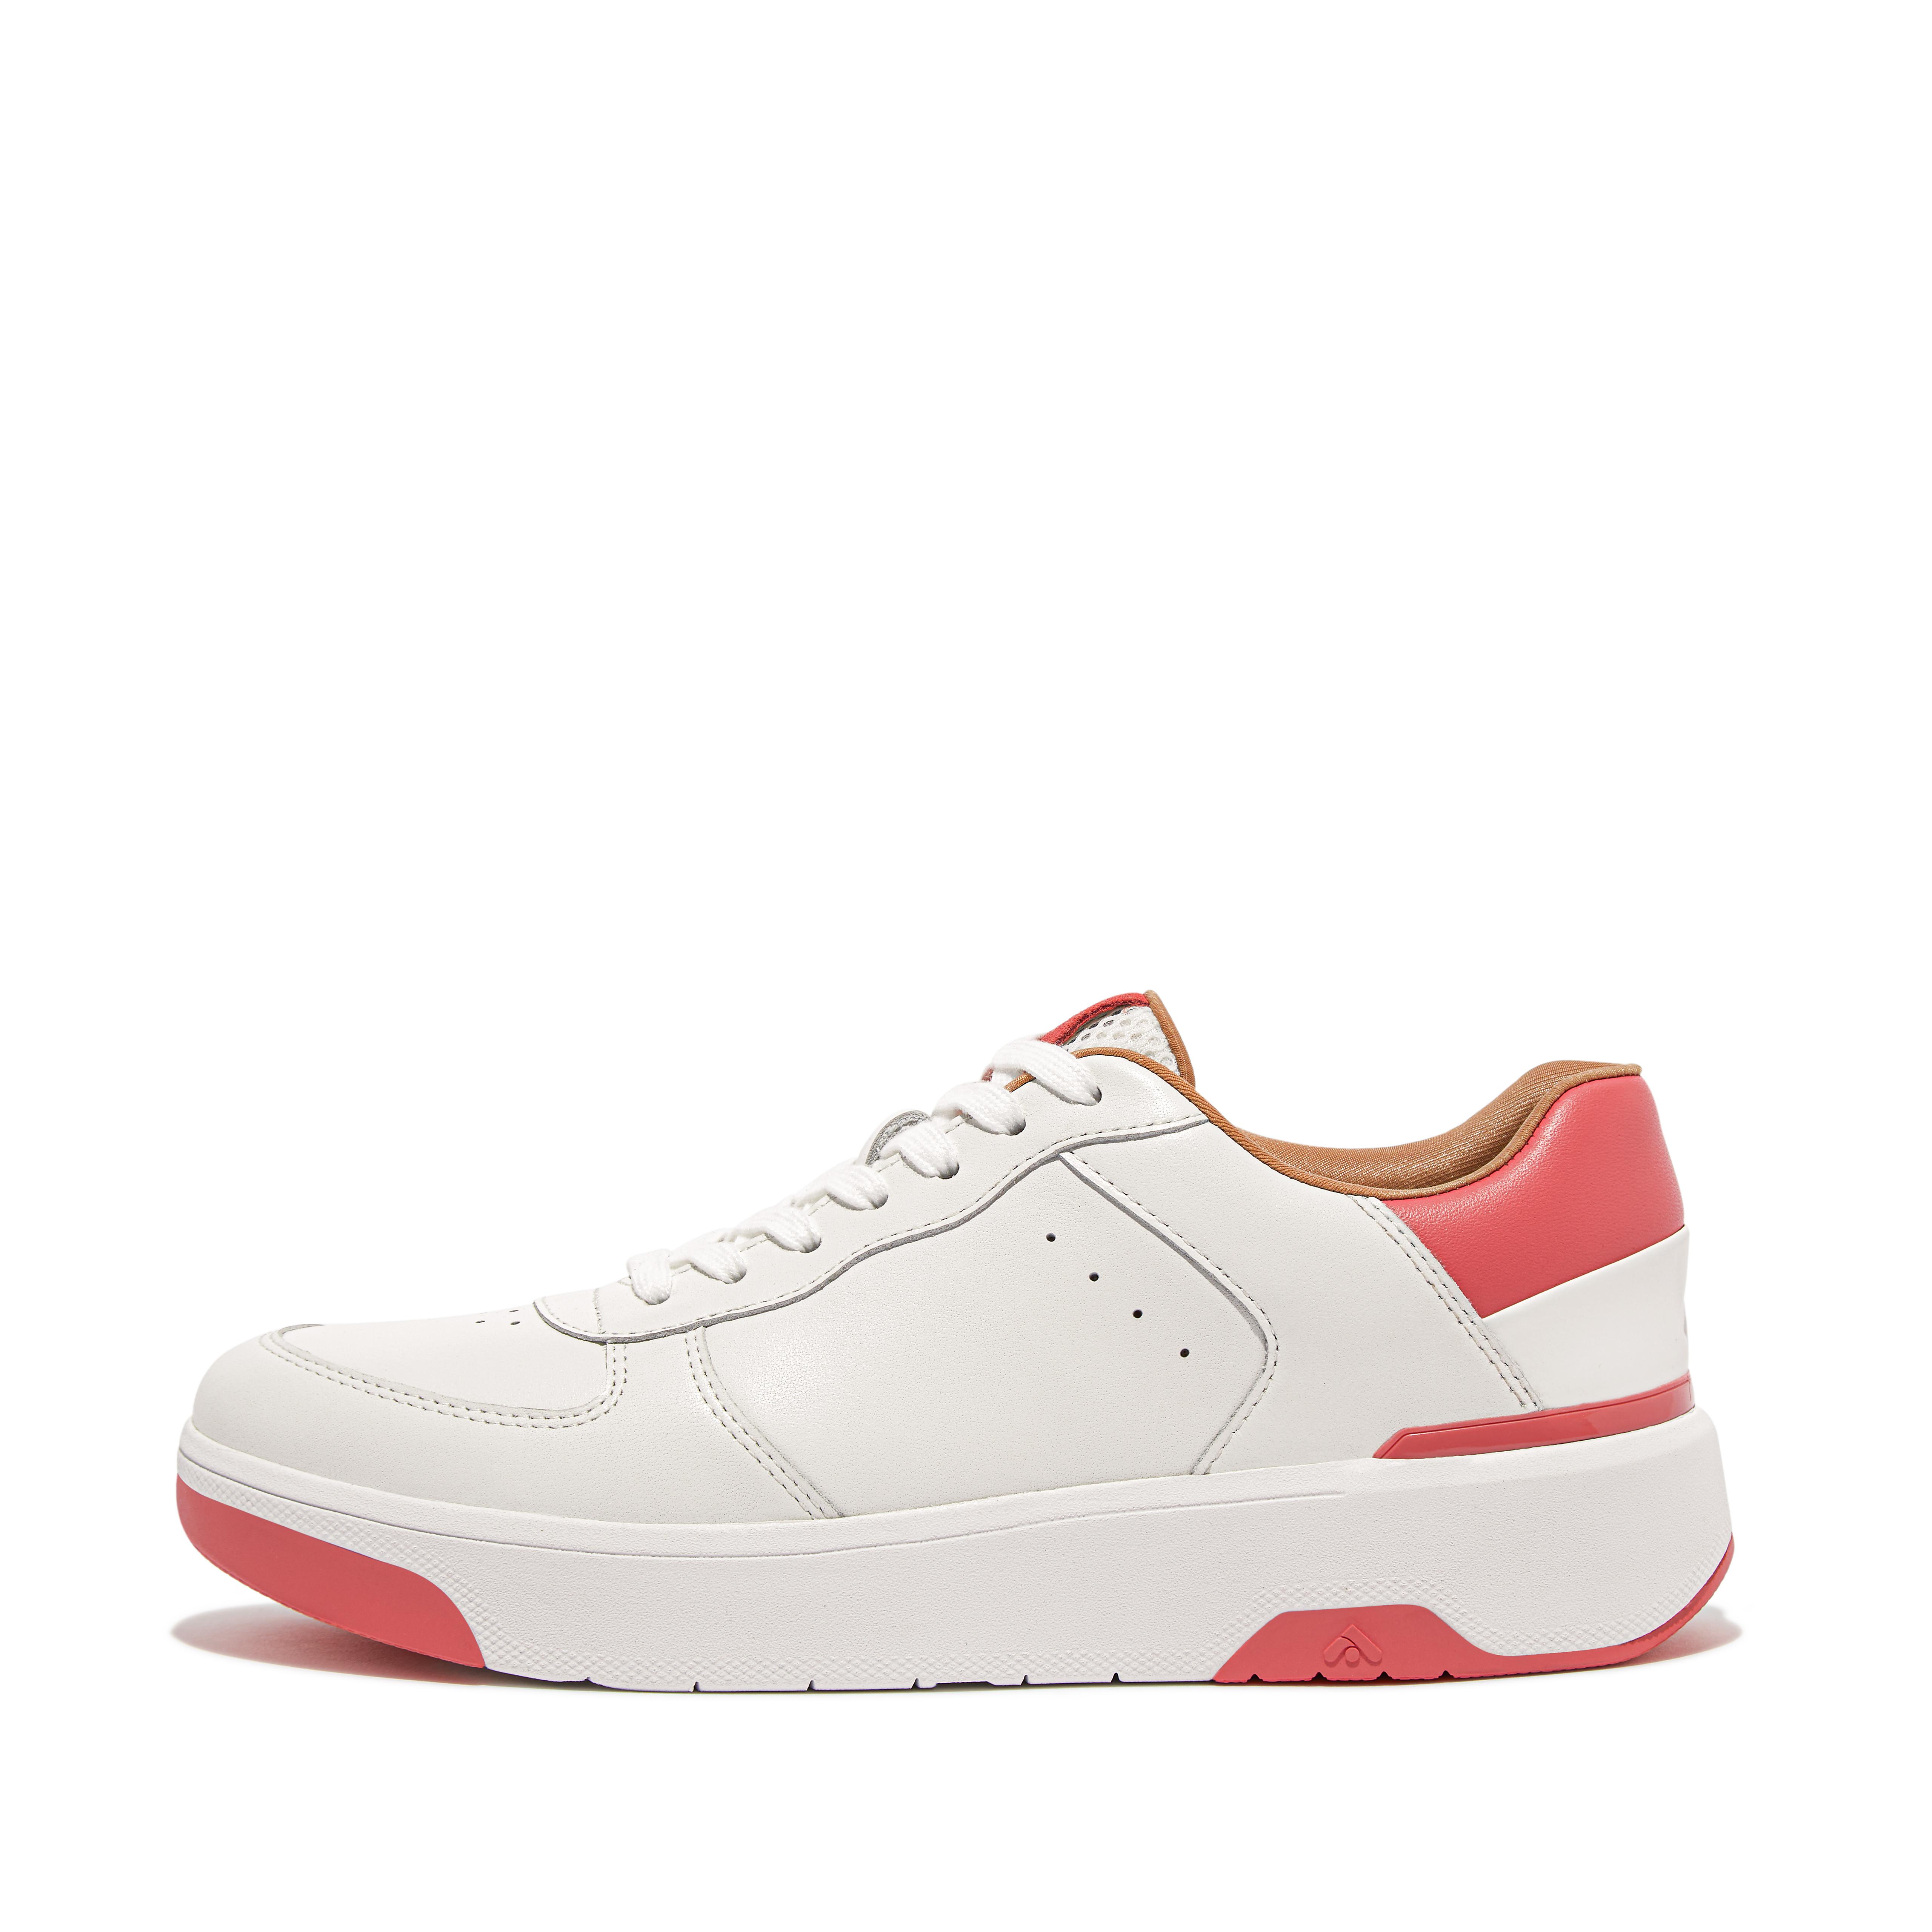 Fitflop Leather Sneakers,urban-white/rosy-coral